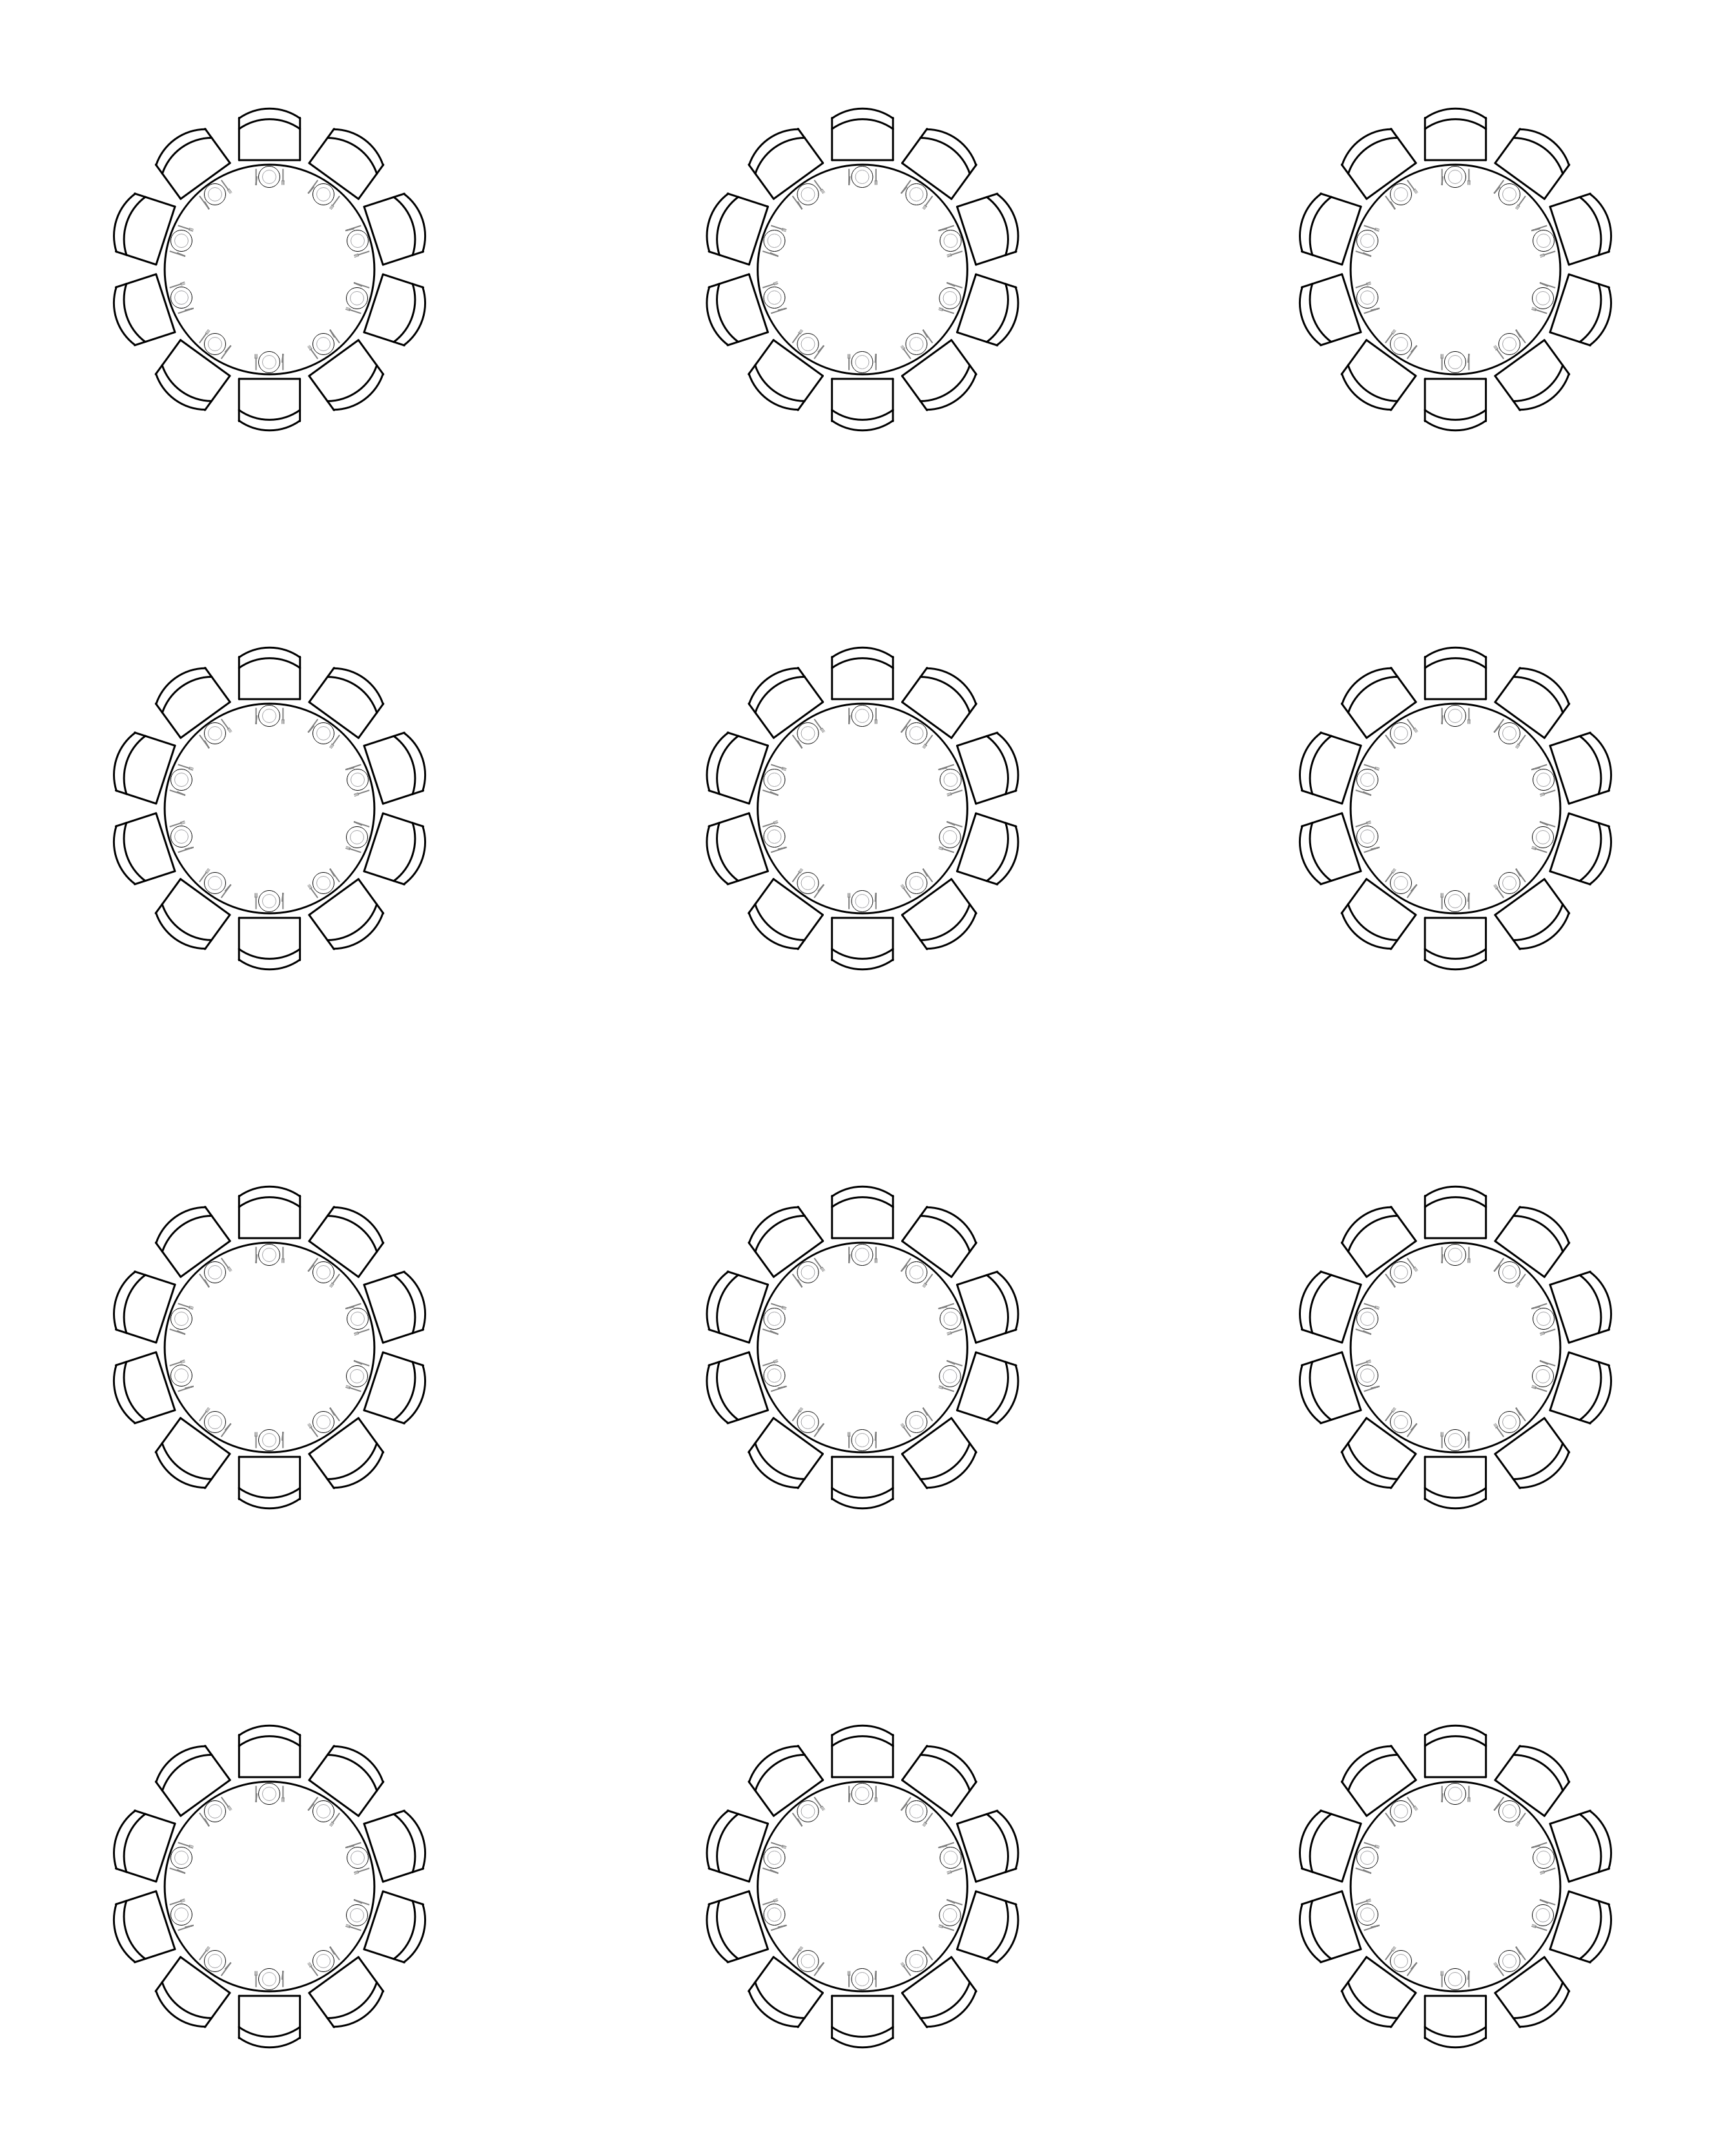 Round Table Wedding Seating Chart Template from www.perfecttableplan.com